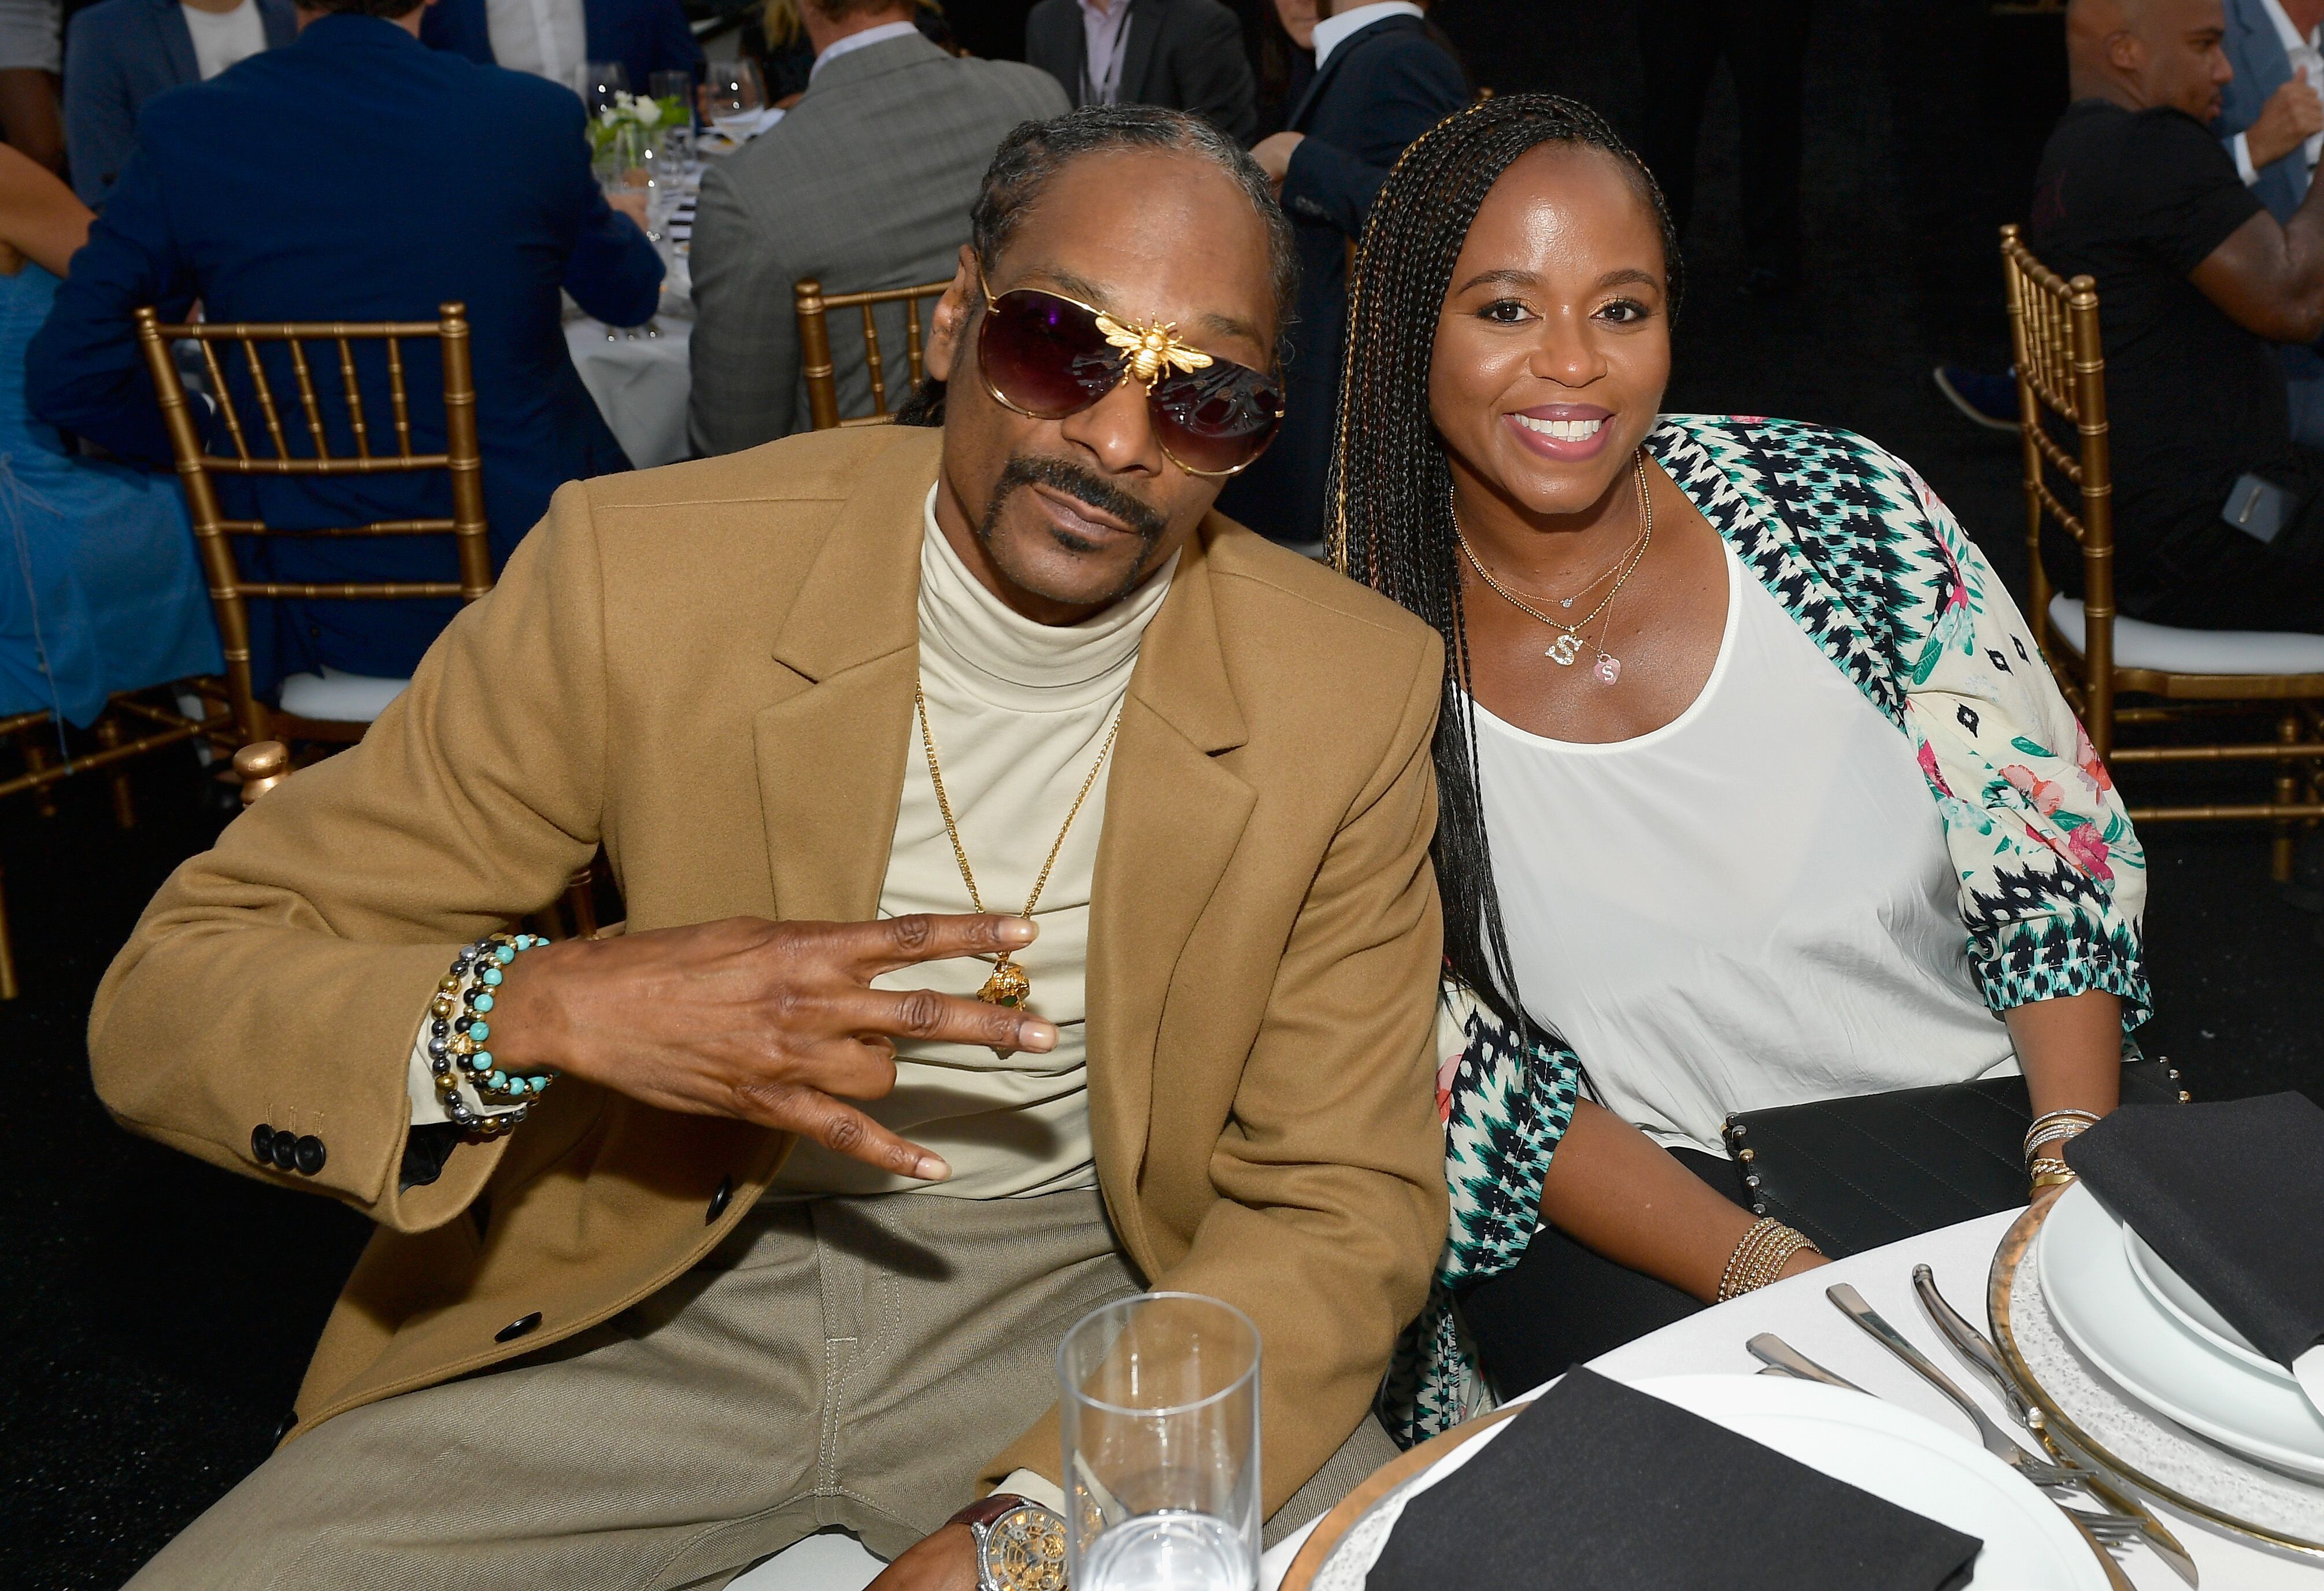 Snoop Dogg and Shante Broadus attend the 33rd Annual Cedars-Sinai Sports Spectacular at The Compound on July 15, 2018 | Photo: Getty Images